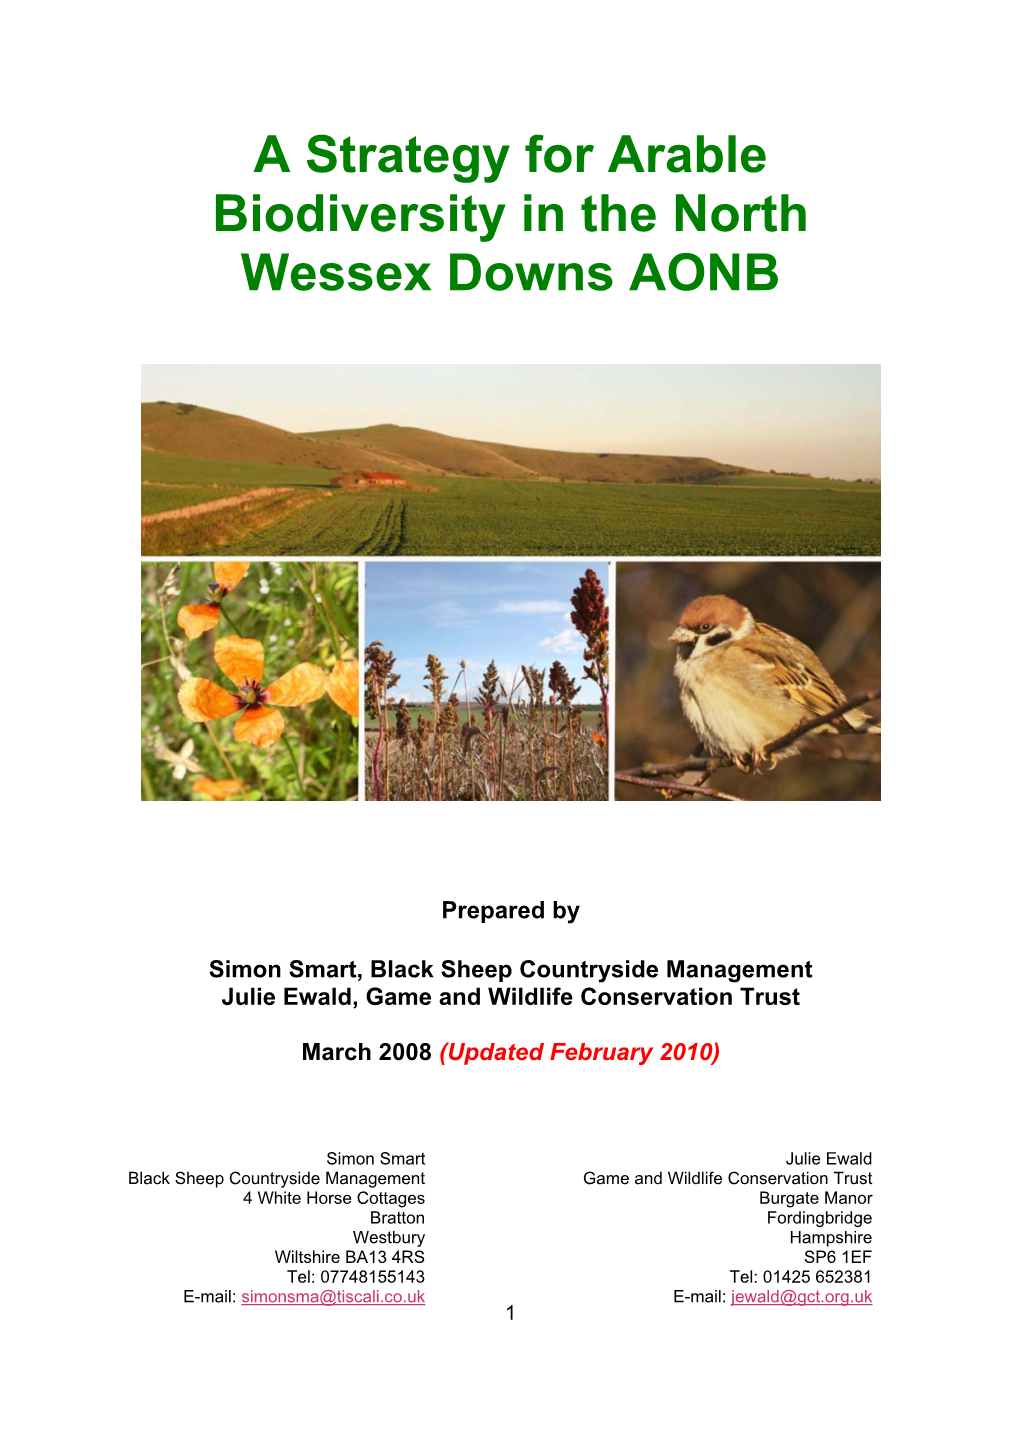 Download the Arable Biodiversity Strategy